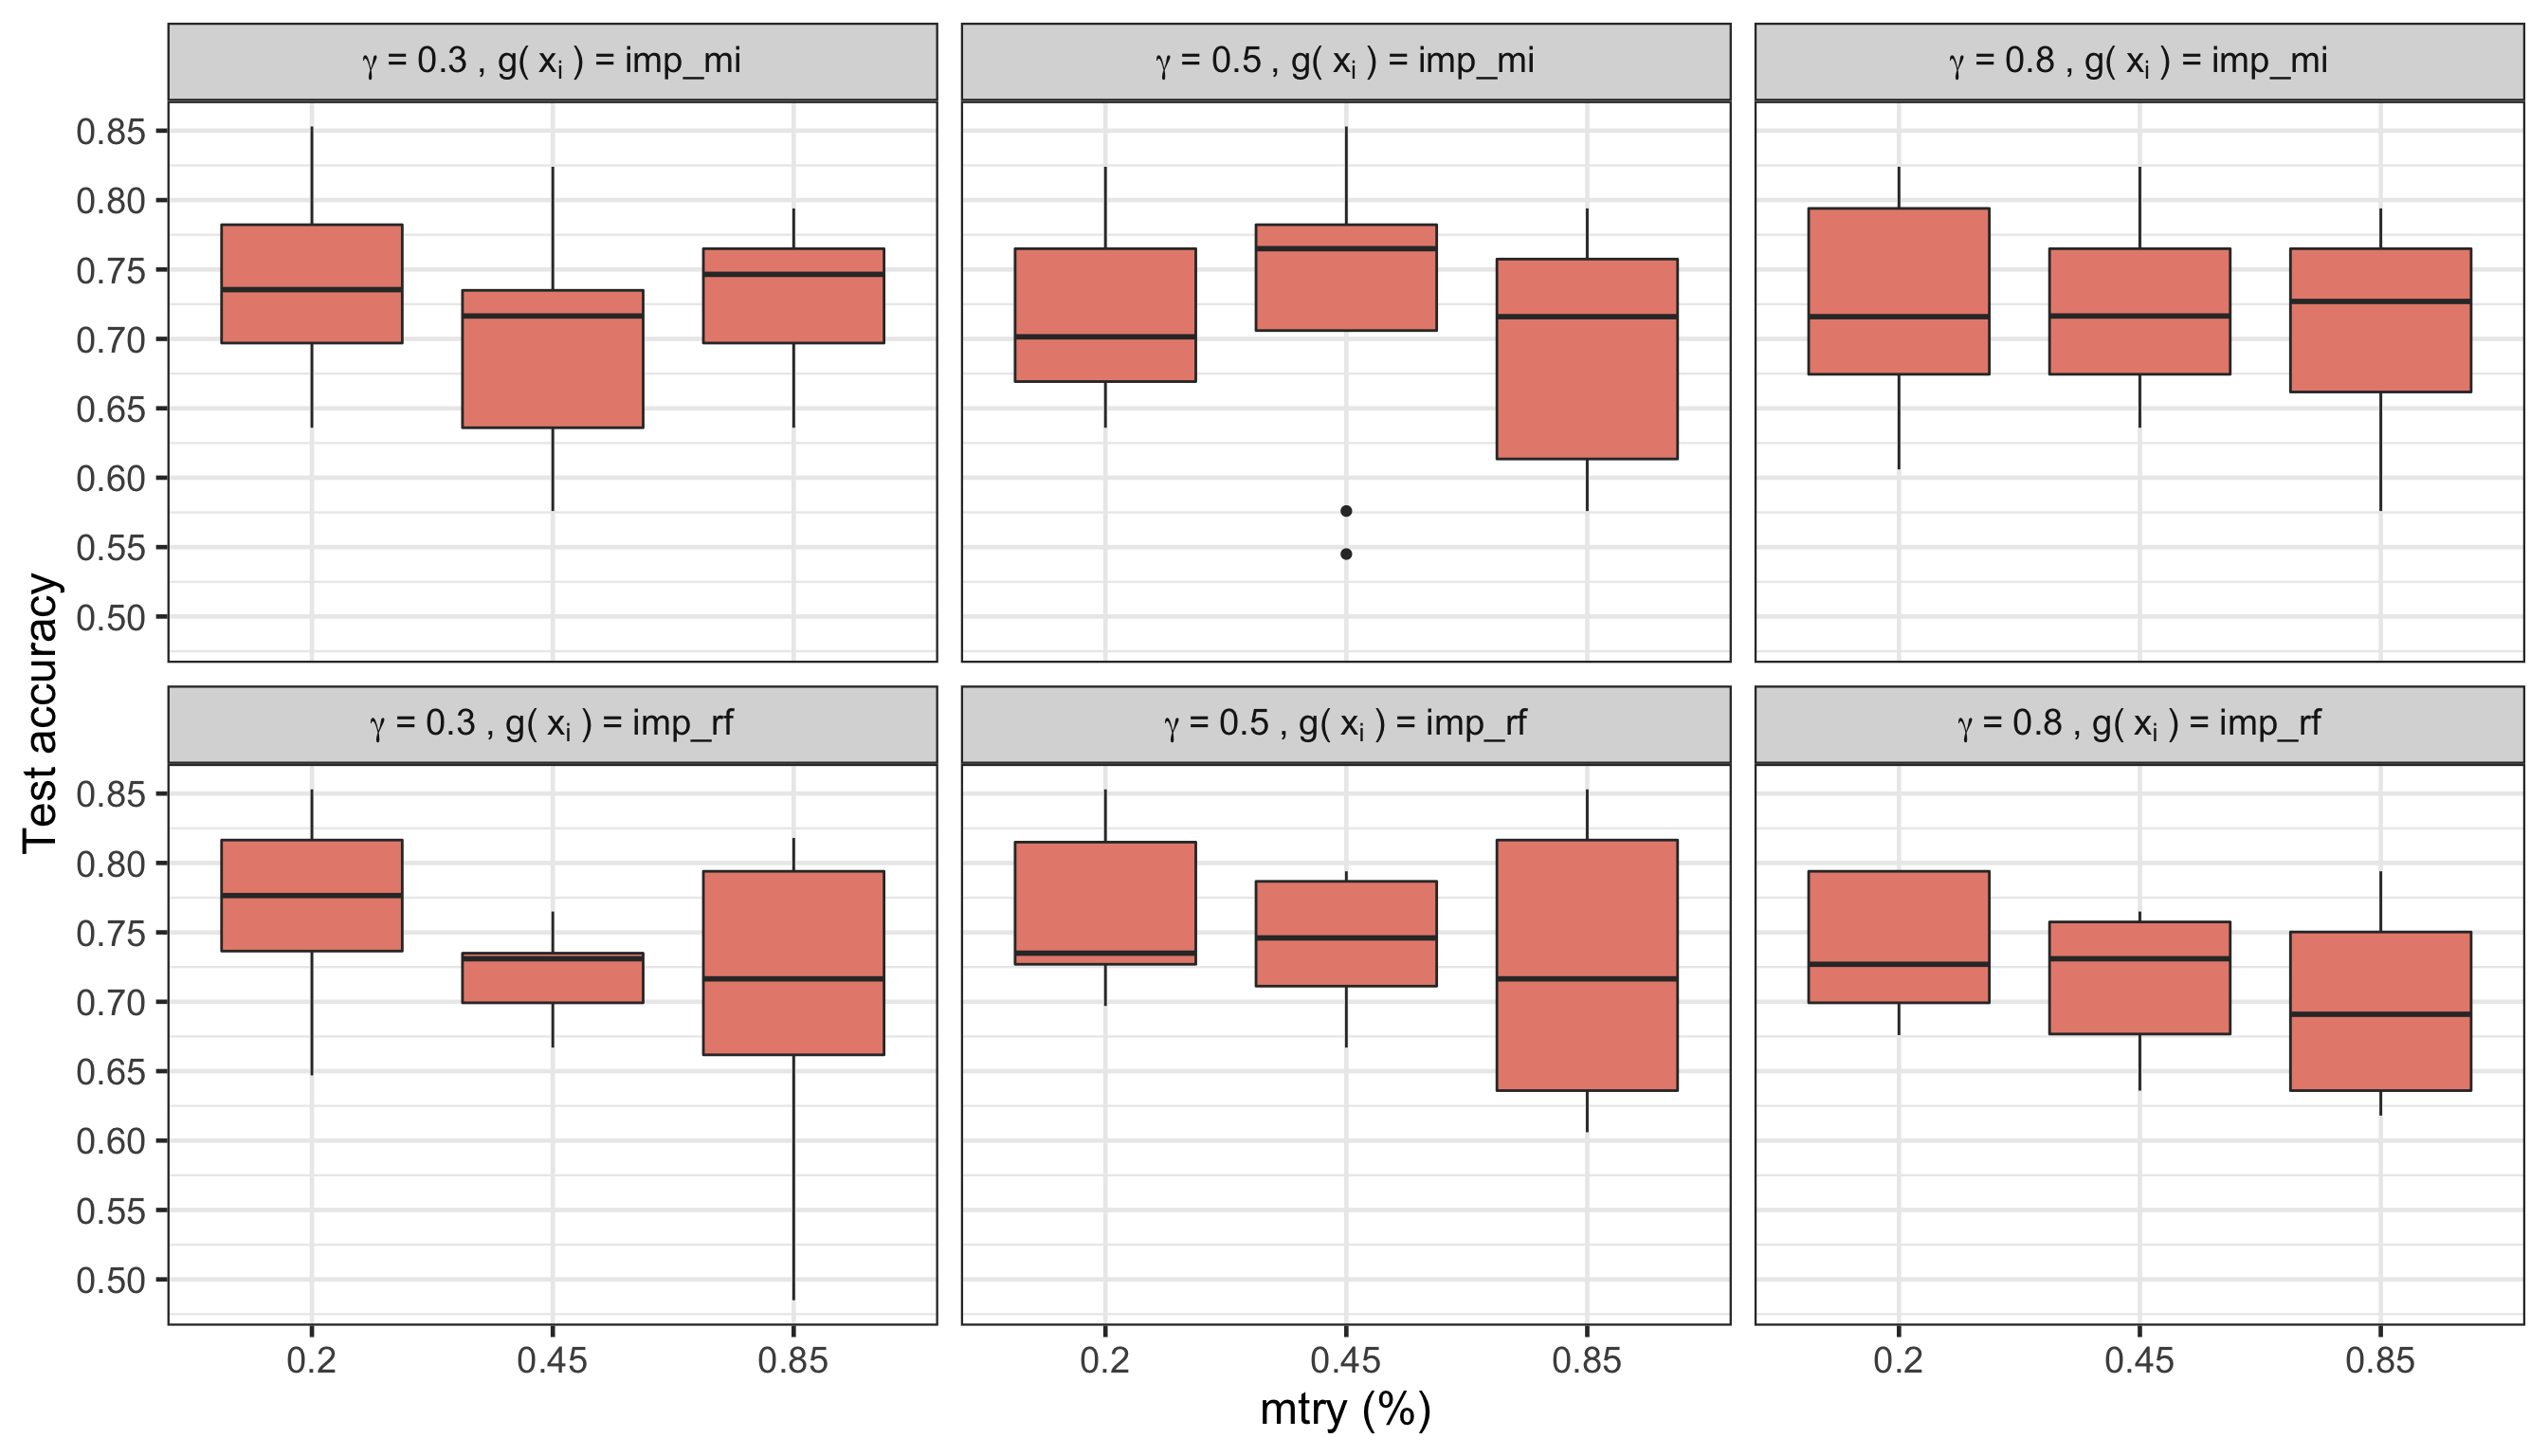 Figure 1. Test accuracies for each combination of mtry, type of $g(\mathbf{x}_i)$, and $\gamma$.